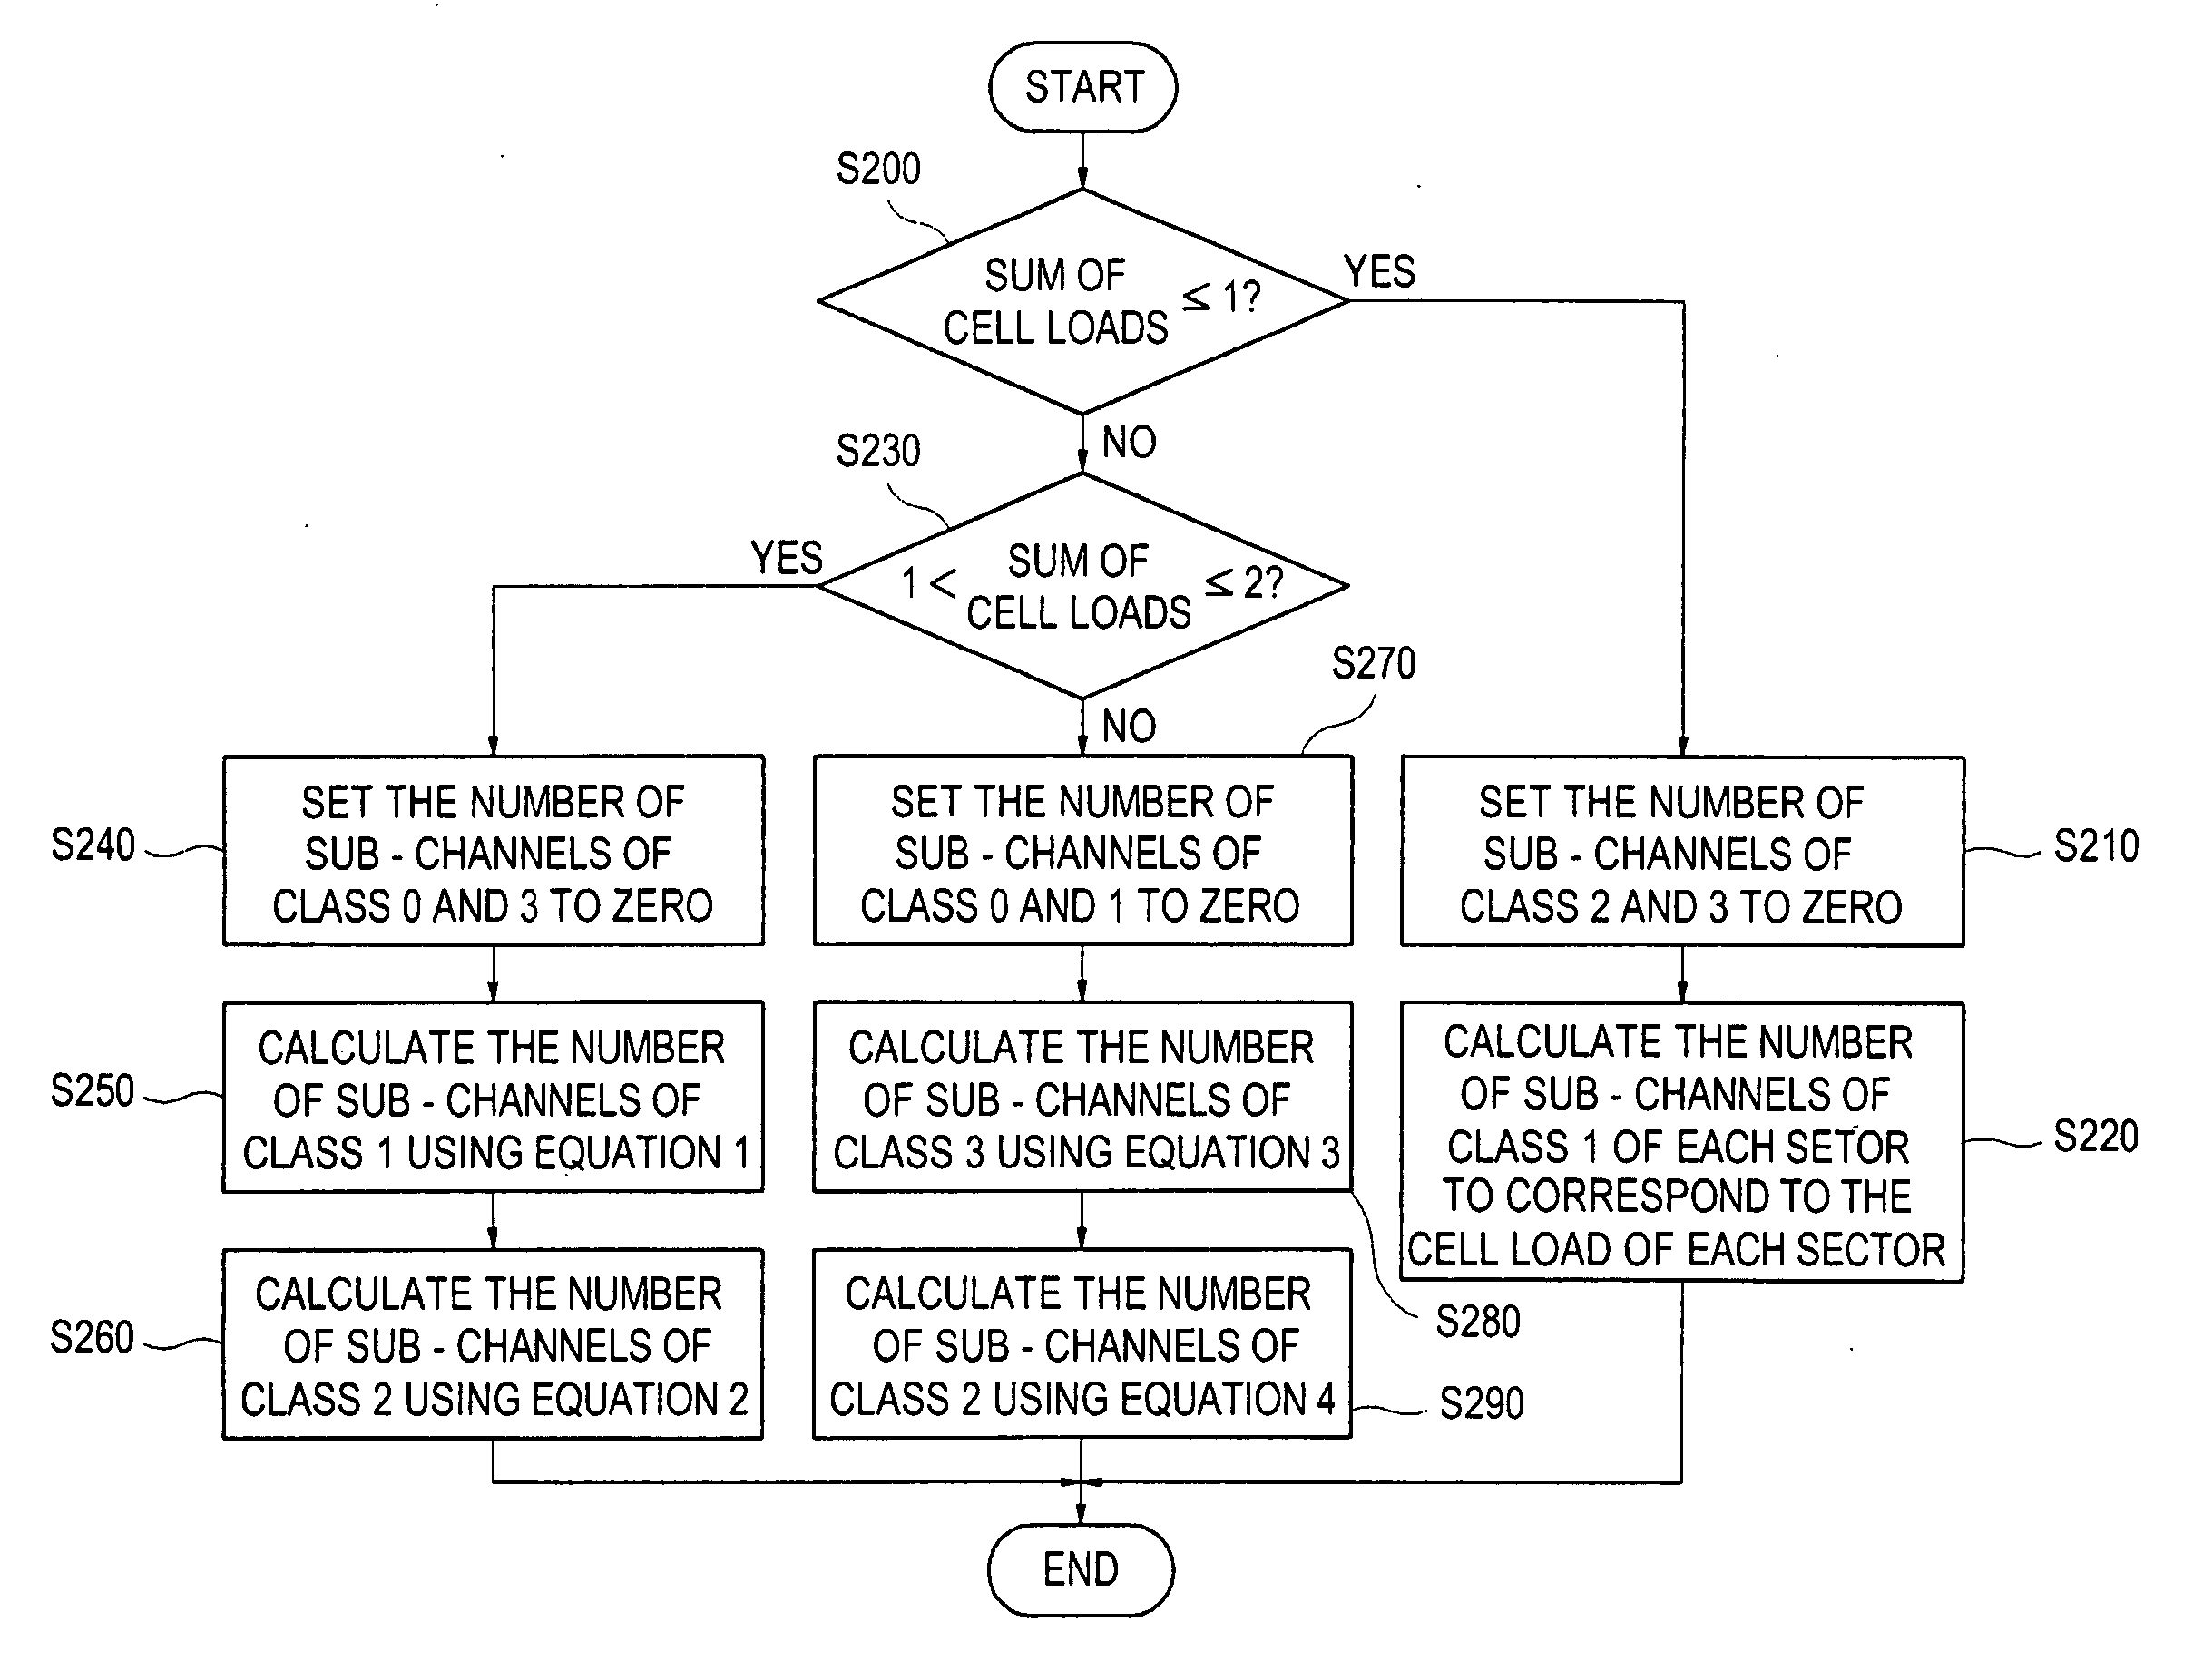 Apparatus and method for assigning sub-channels in an OFDMA system